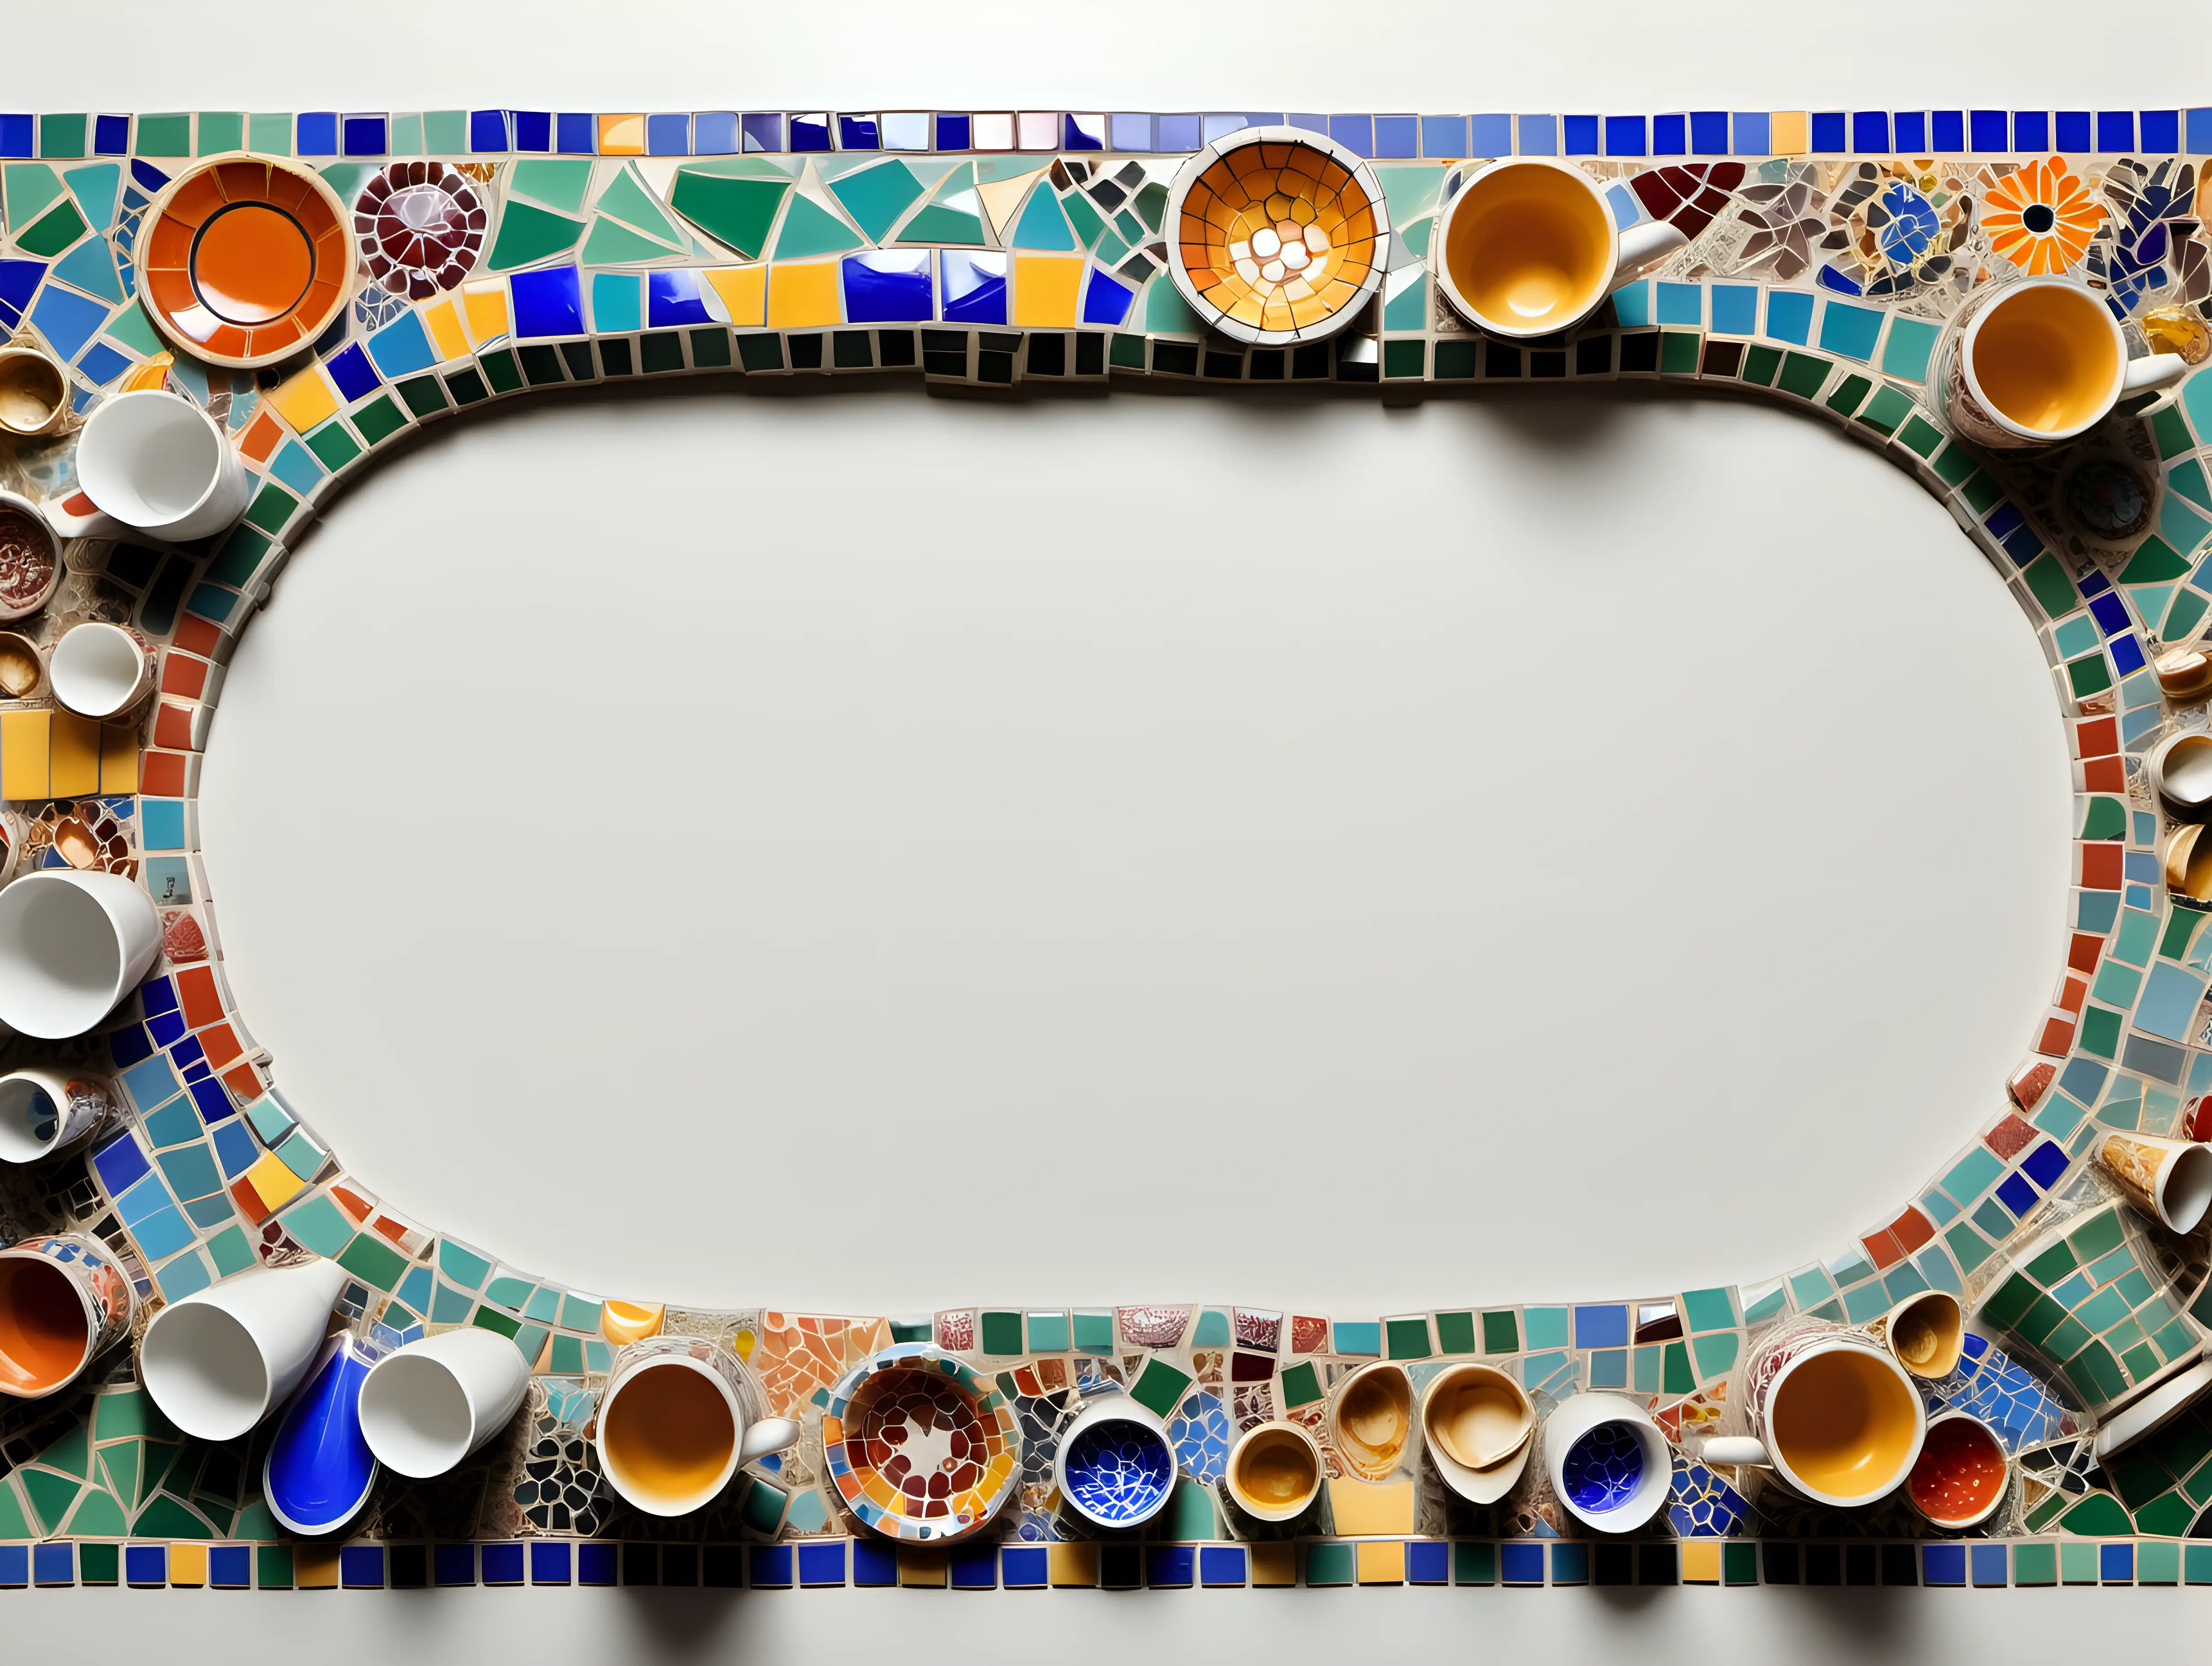 Vibrant Mosaic Border GaudiInspired Colorful Art with MiniFigurines